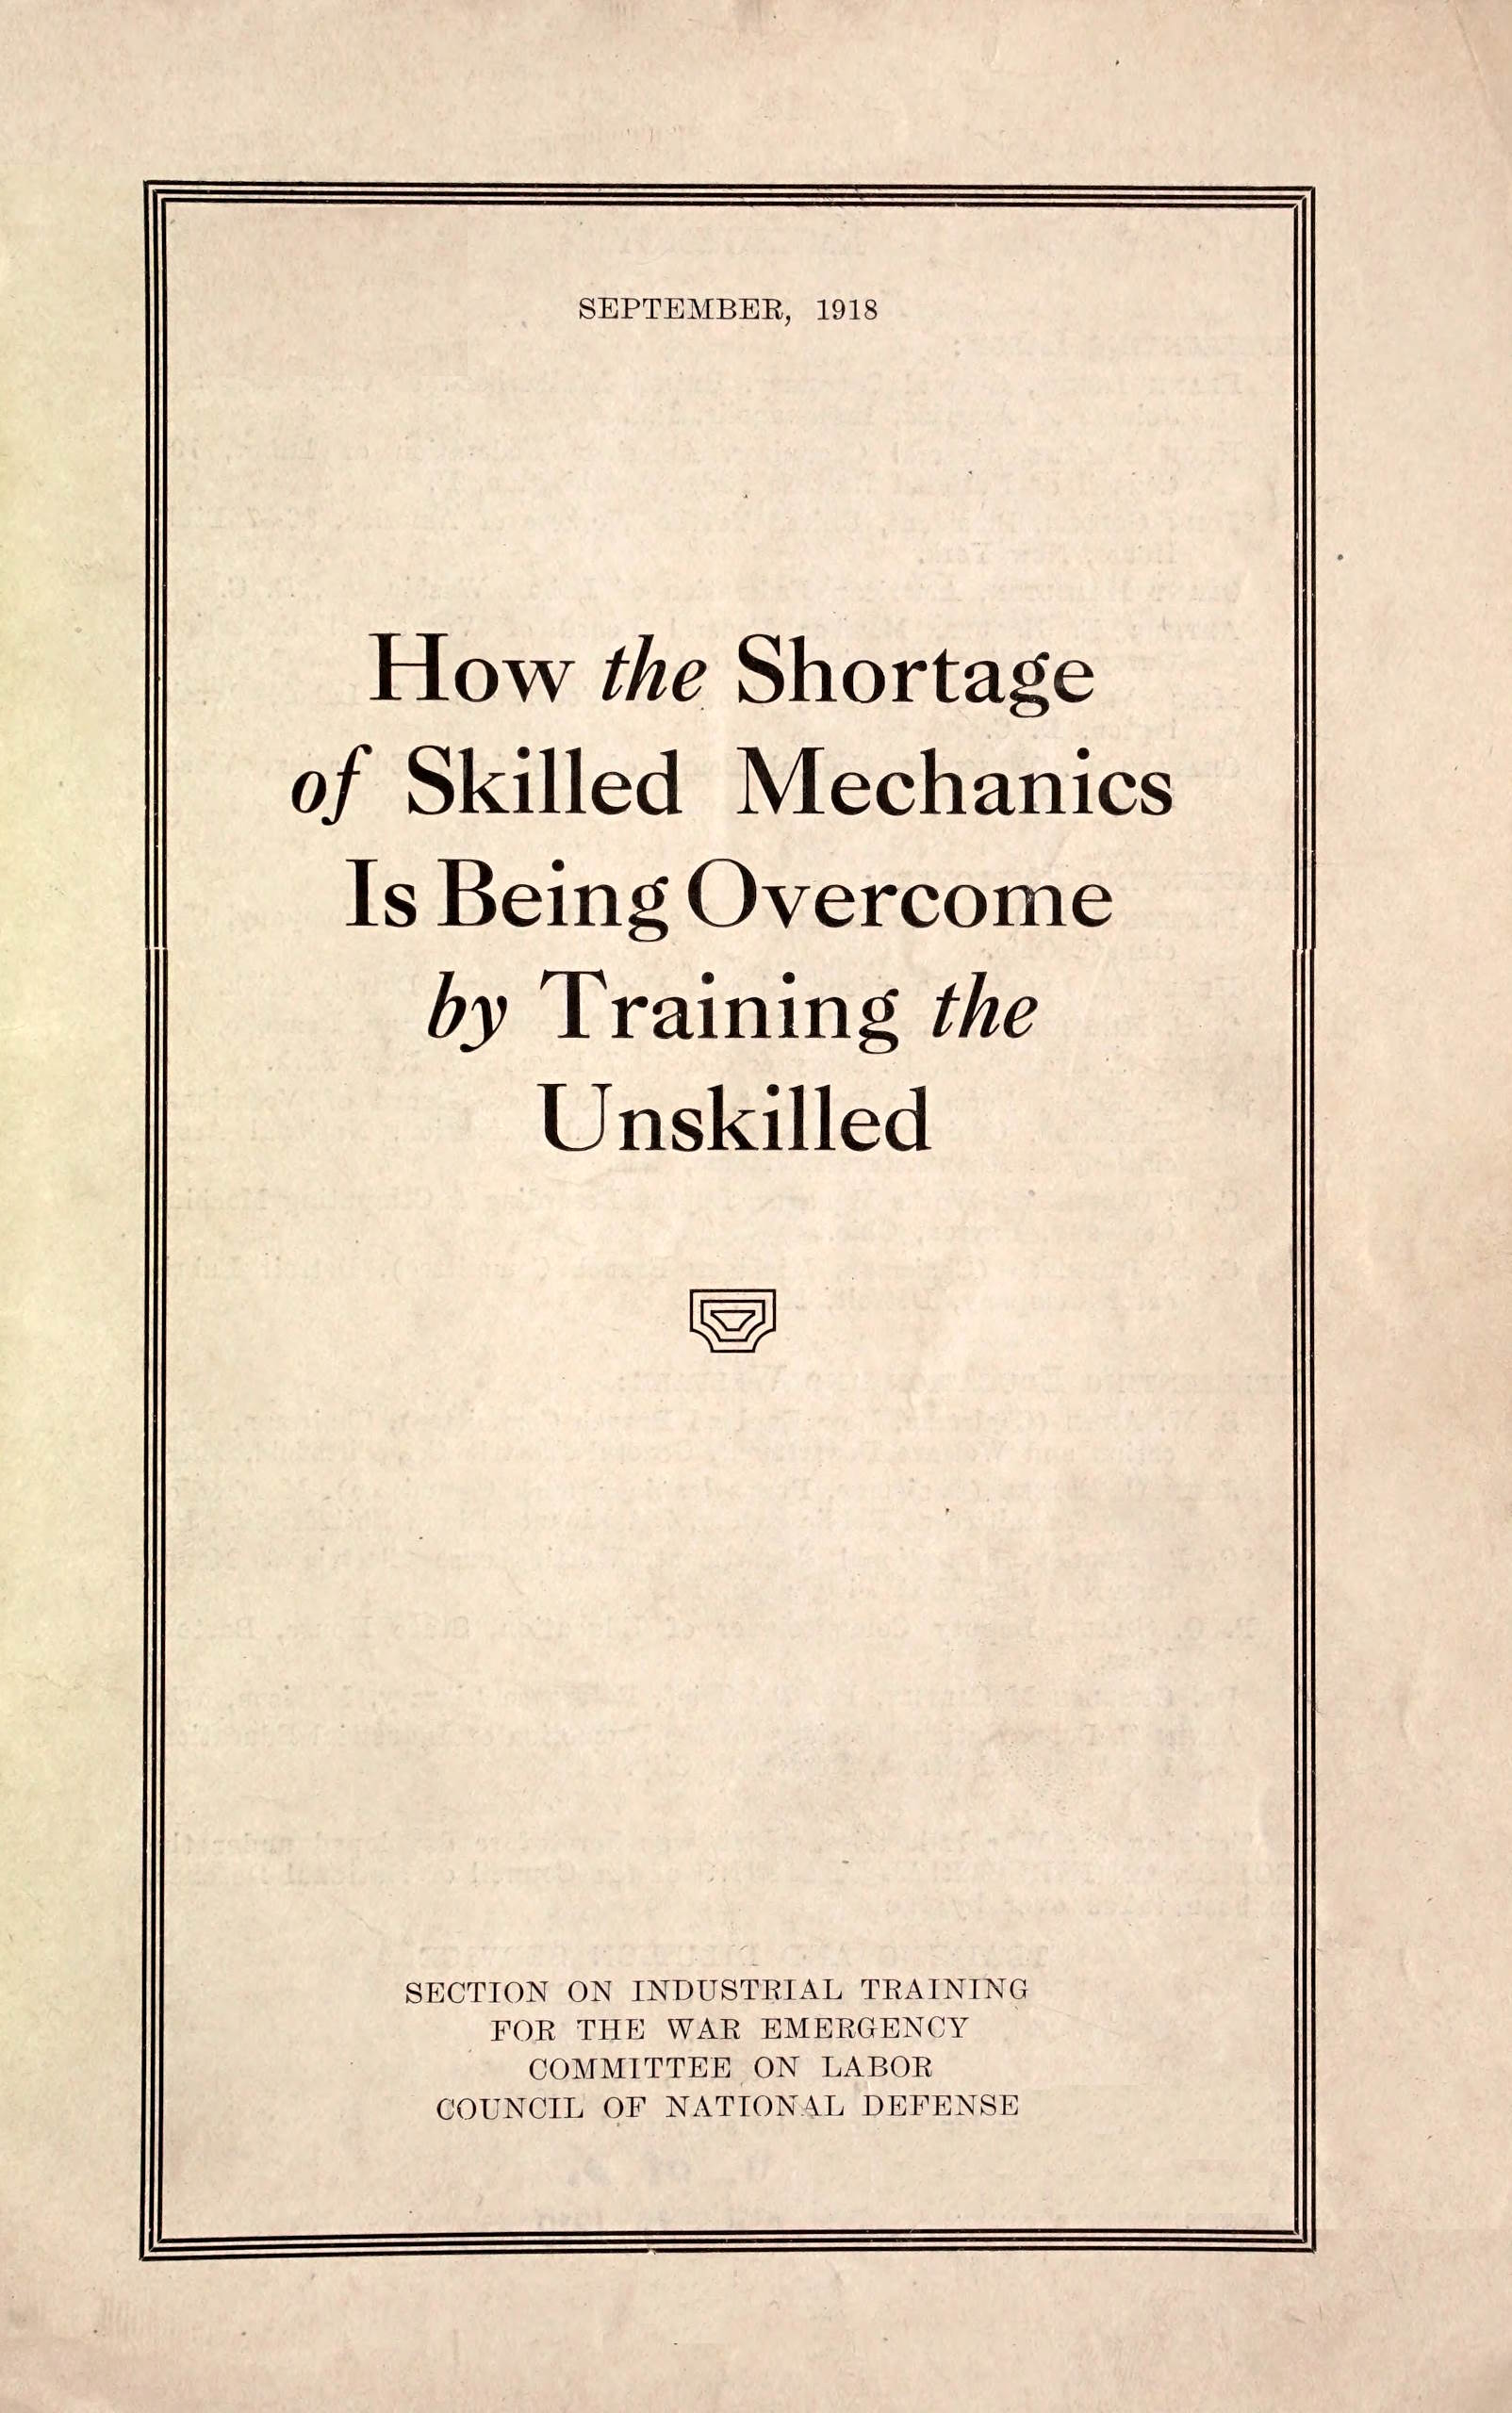 How the shortage of skilled mechanics is being overcome by training the unskilled